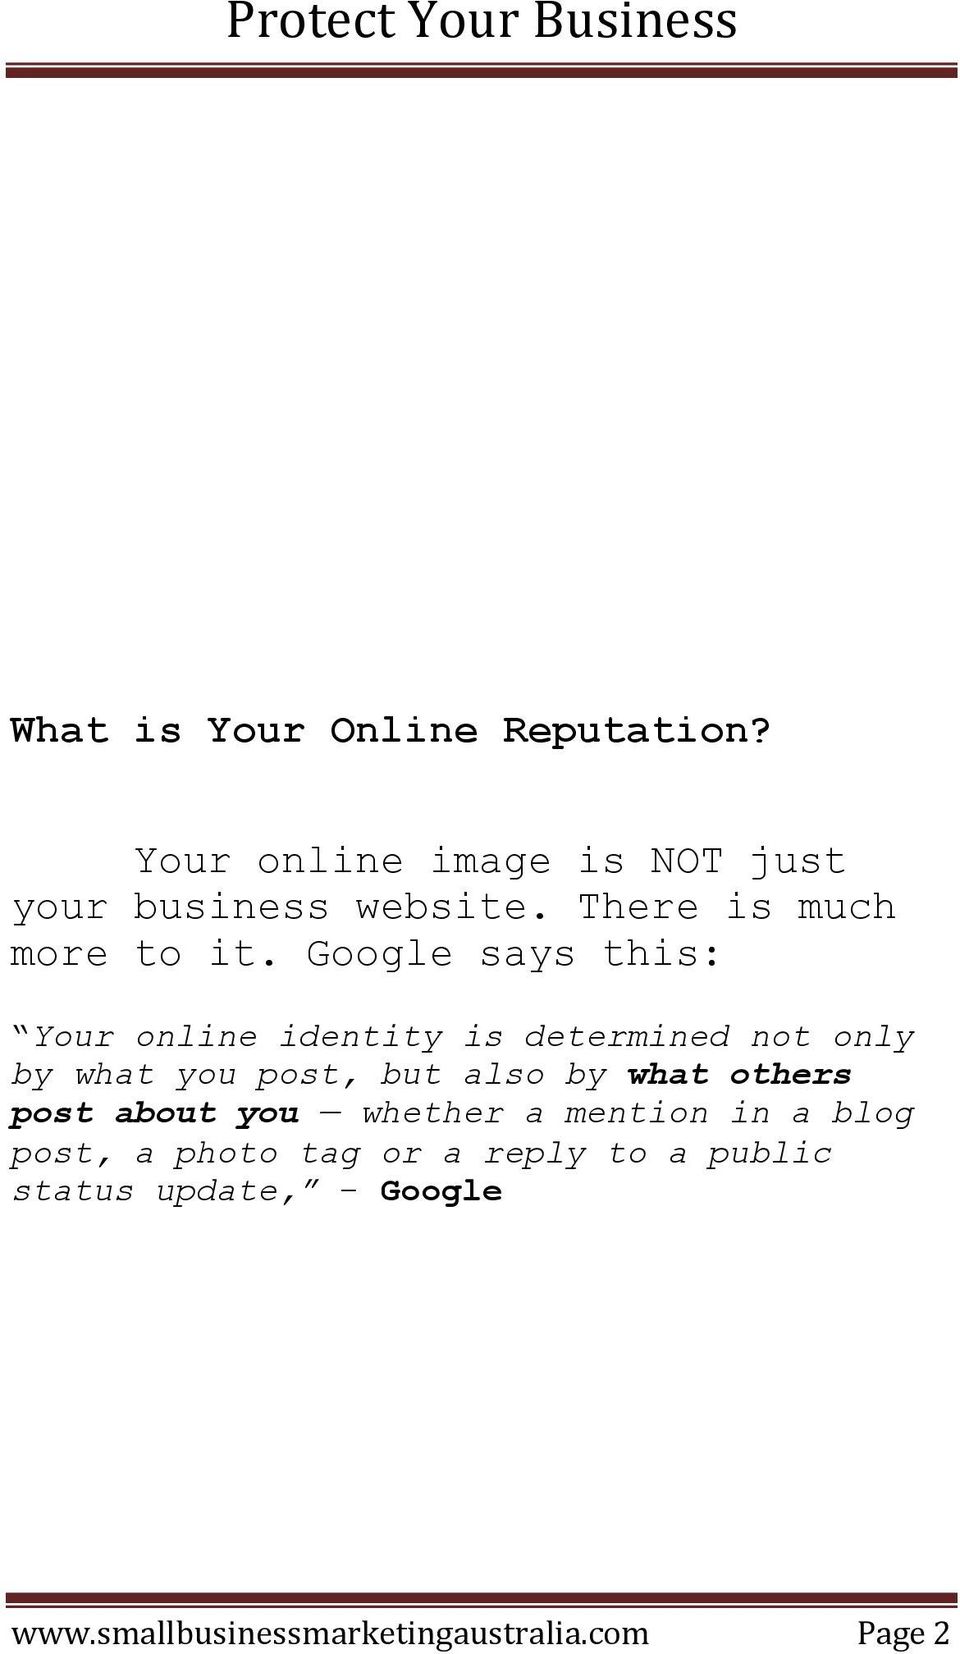 Google says this: Your online identity is determined not only by what you post, but also by